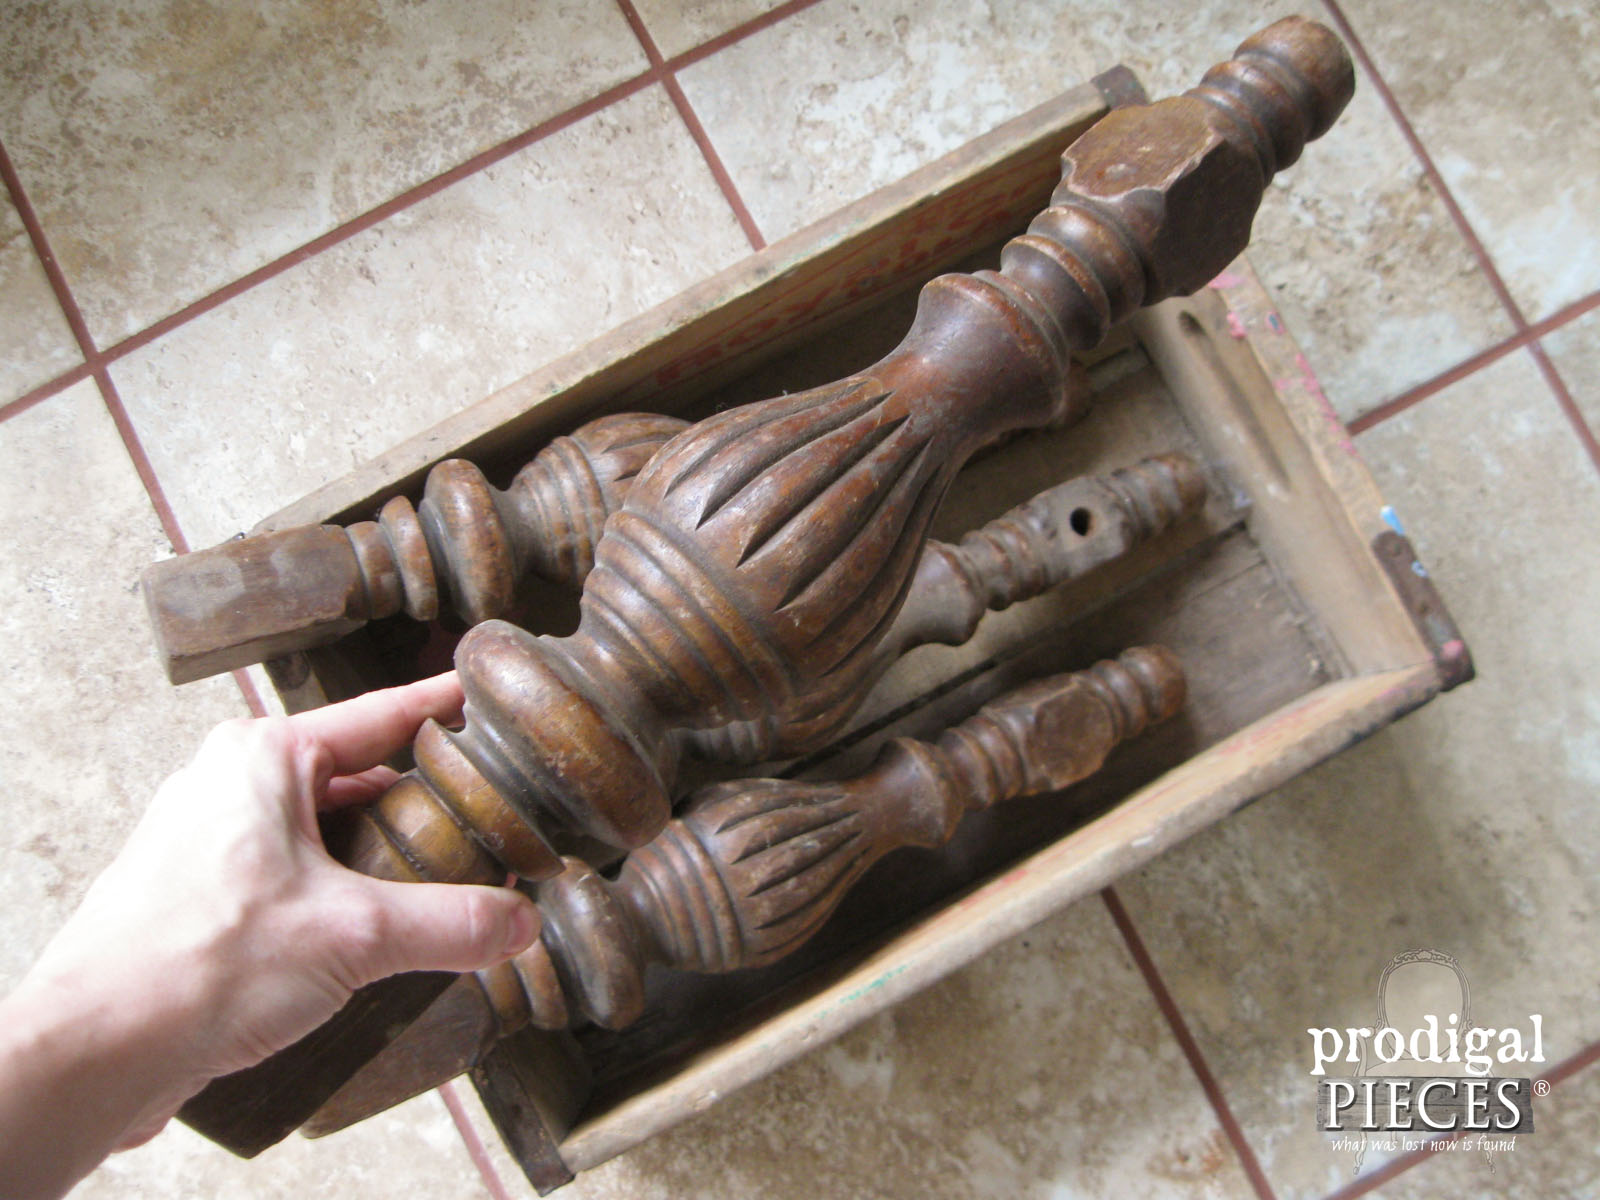 Hand Carved Chair Legs Repurposed by Prodigal Pieces | www.prodigalpieces.com